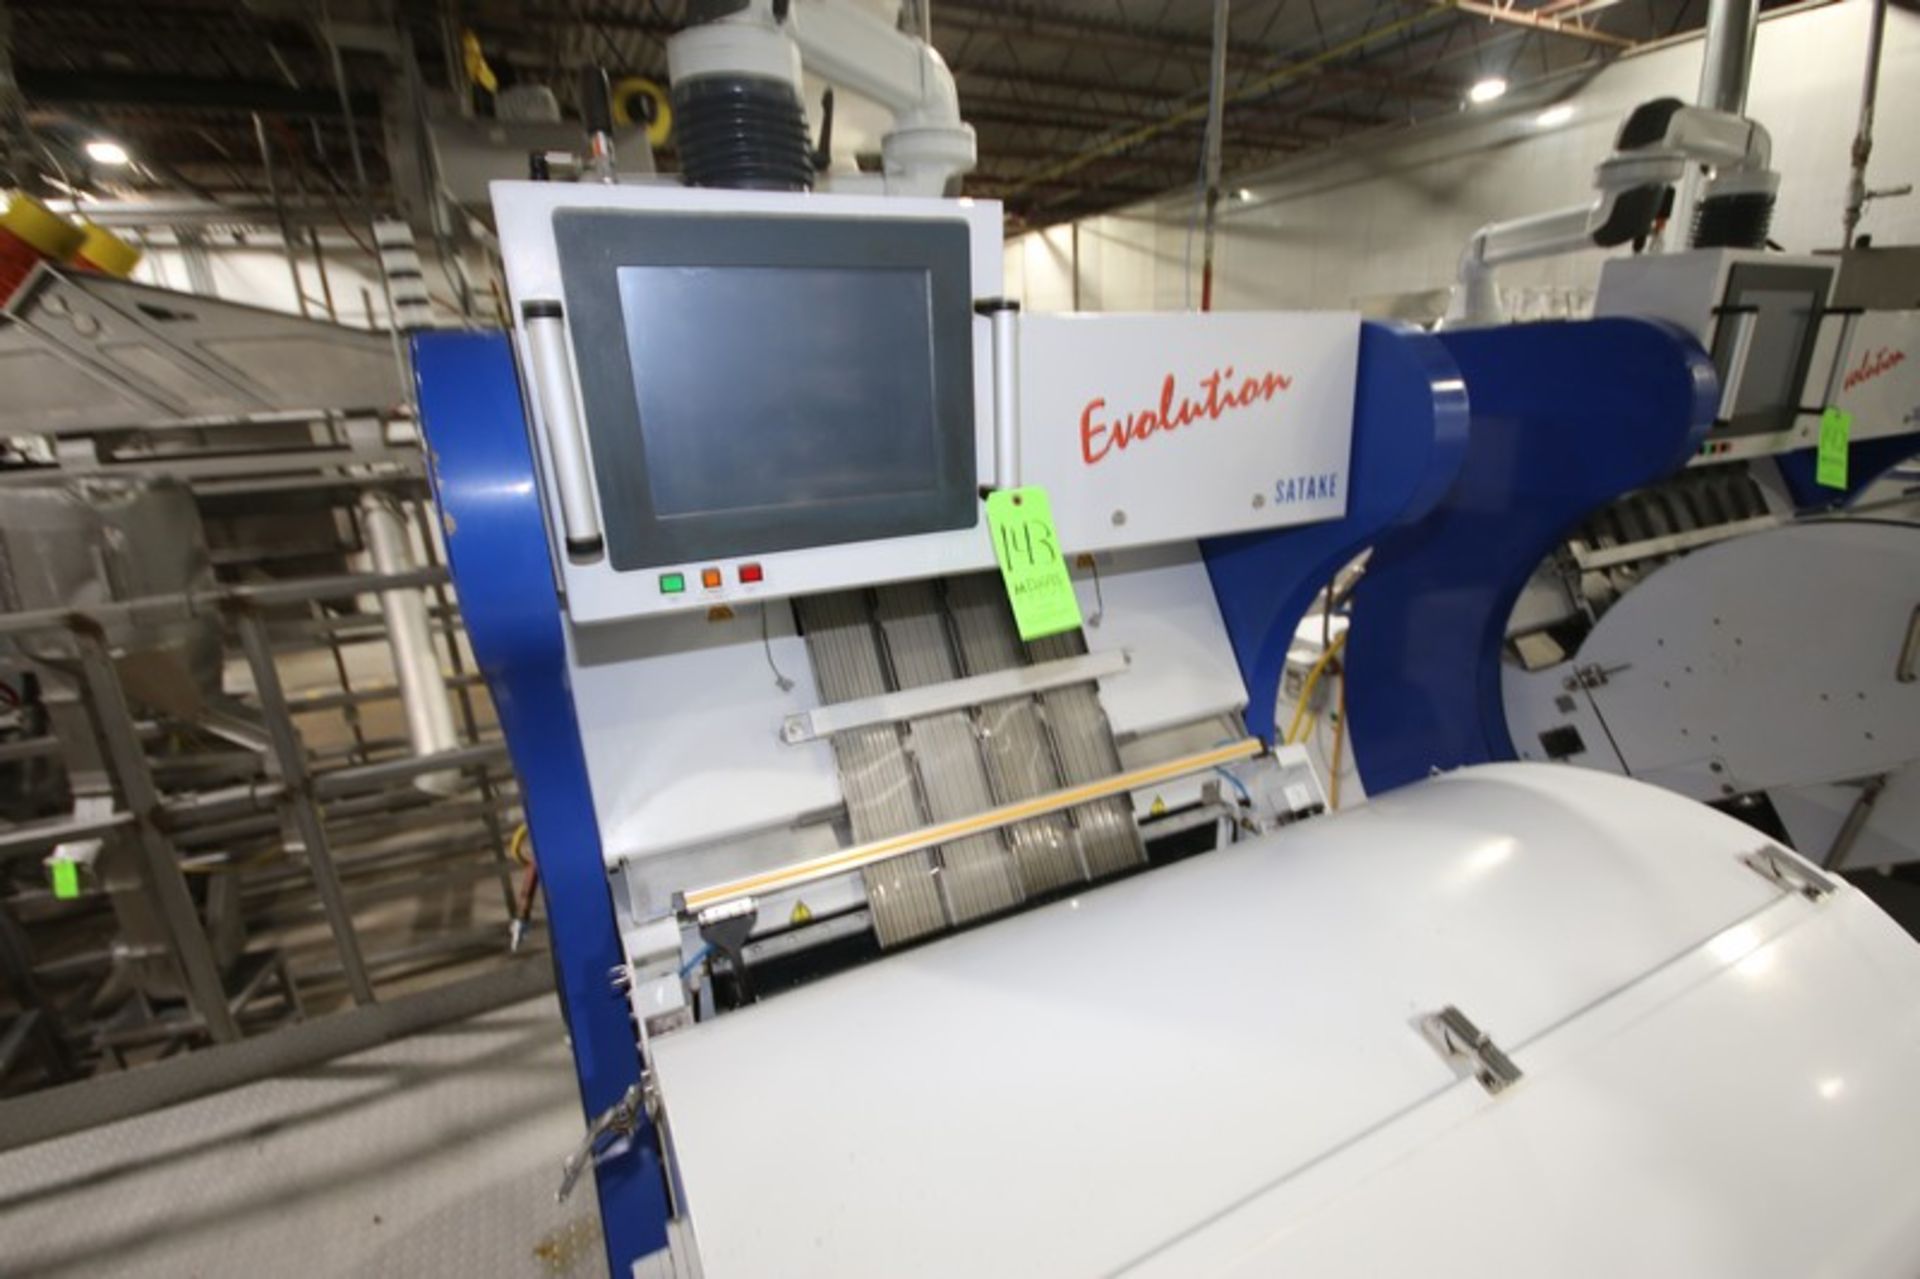 SATAKE USA INC. Optical Sorter & Processor, M/N EVD-MIR-400, S/N 1505041, 230 Volts, 1 Phase, with - Image 3 of 11